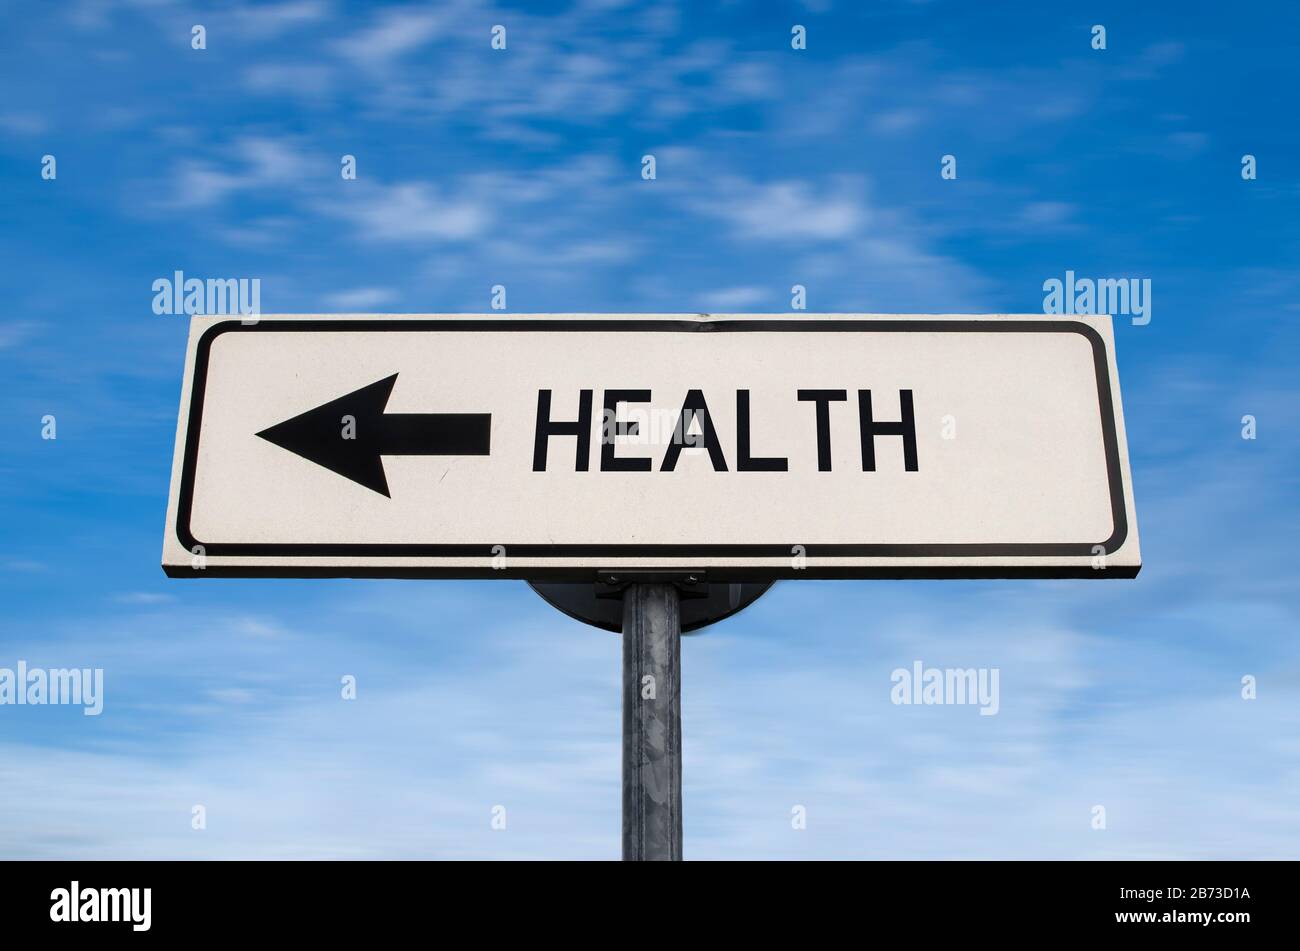 Health road sign, arrow on blue sky background. One way blank road sign with copy space. Arrow on a pole pointing in one direction. Stock Photo